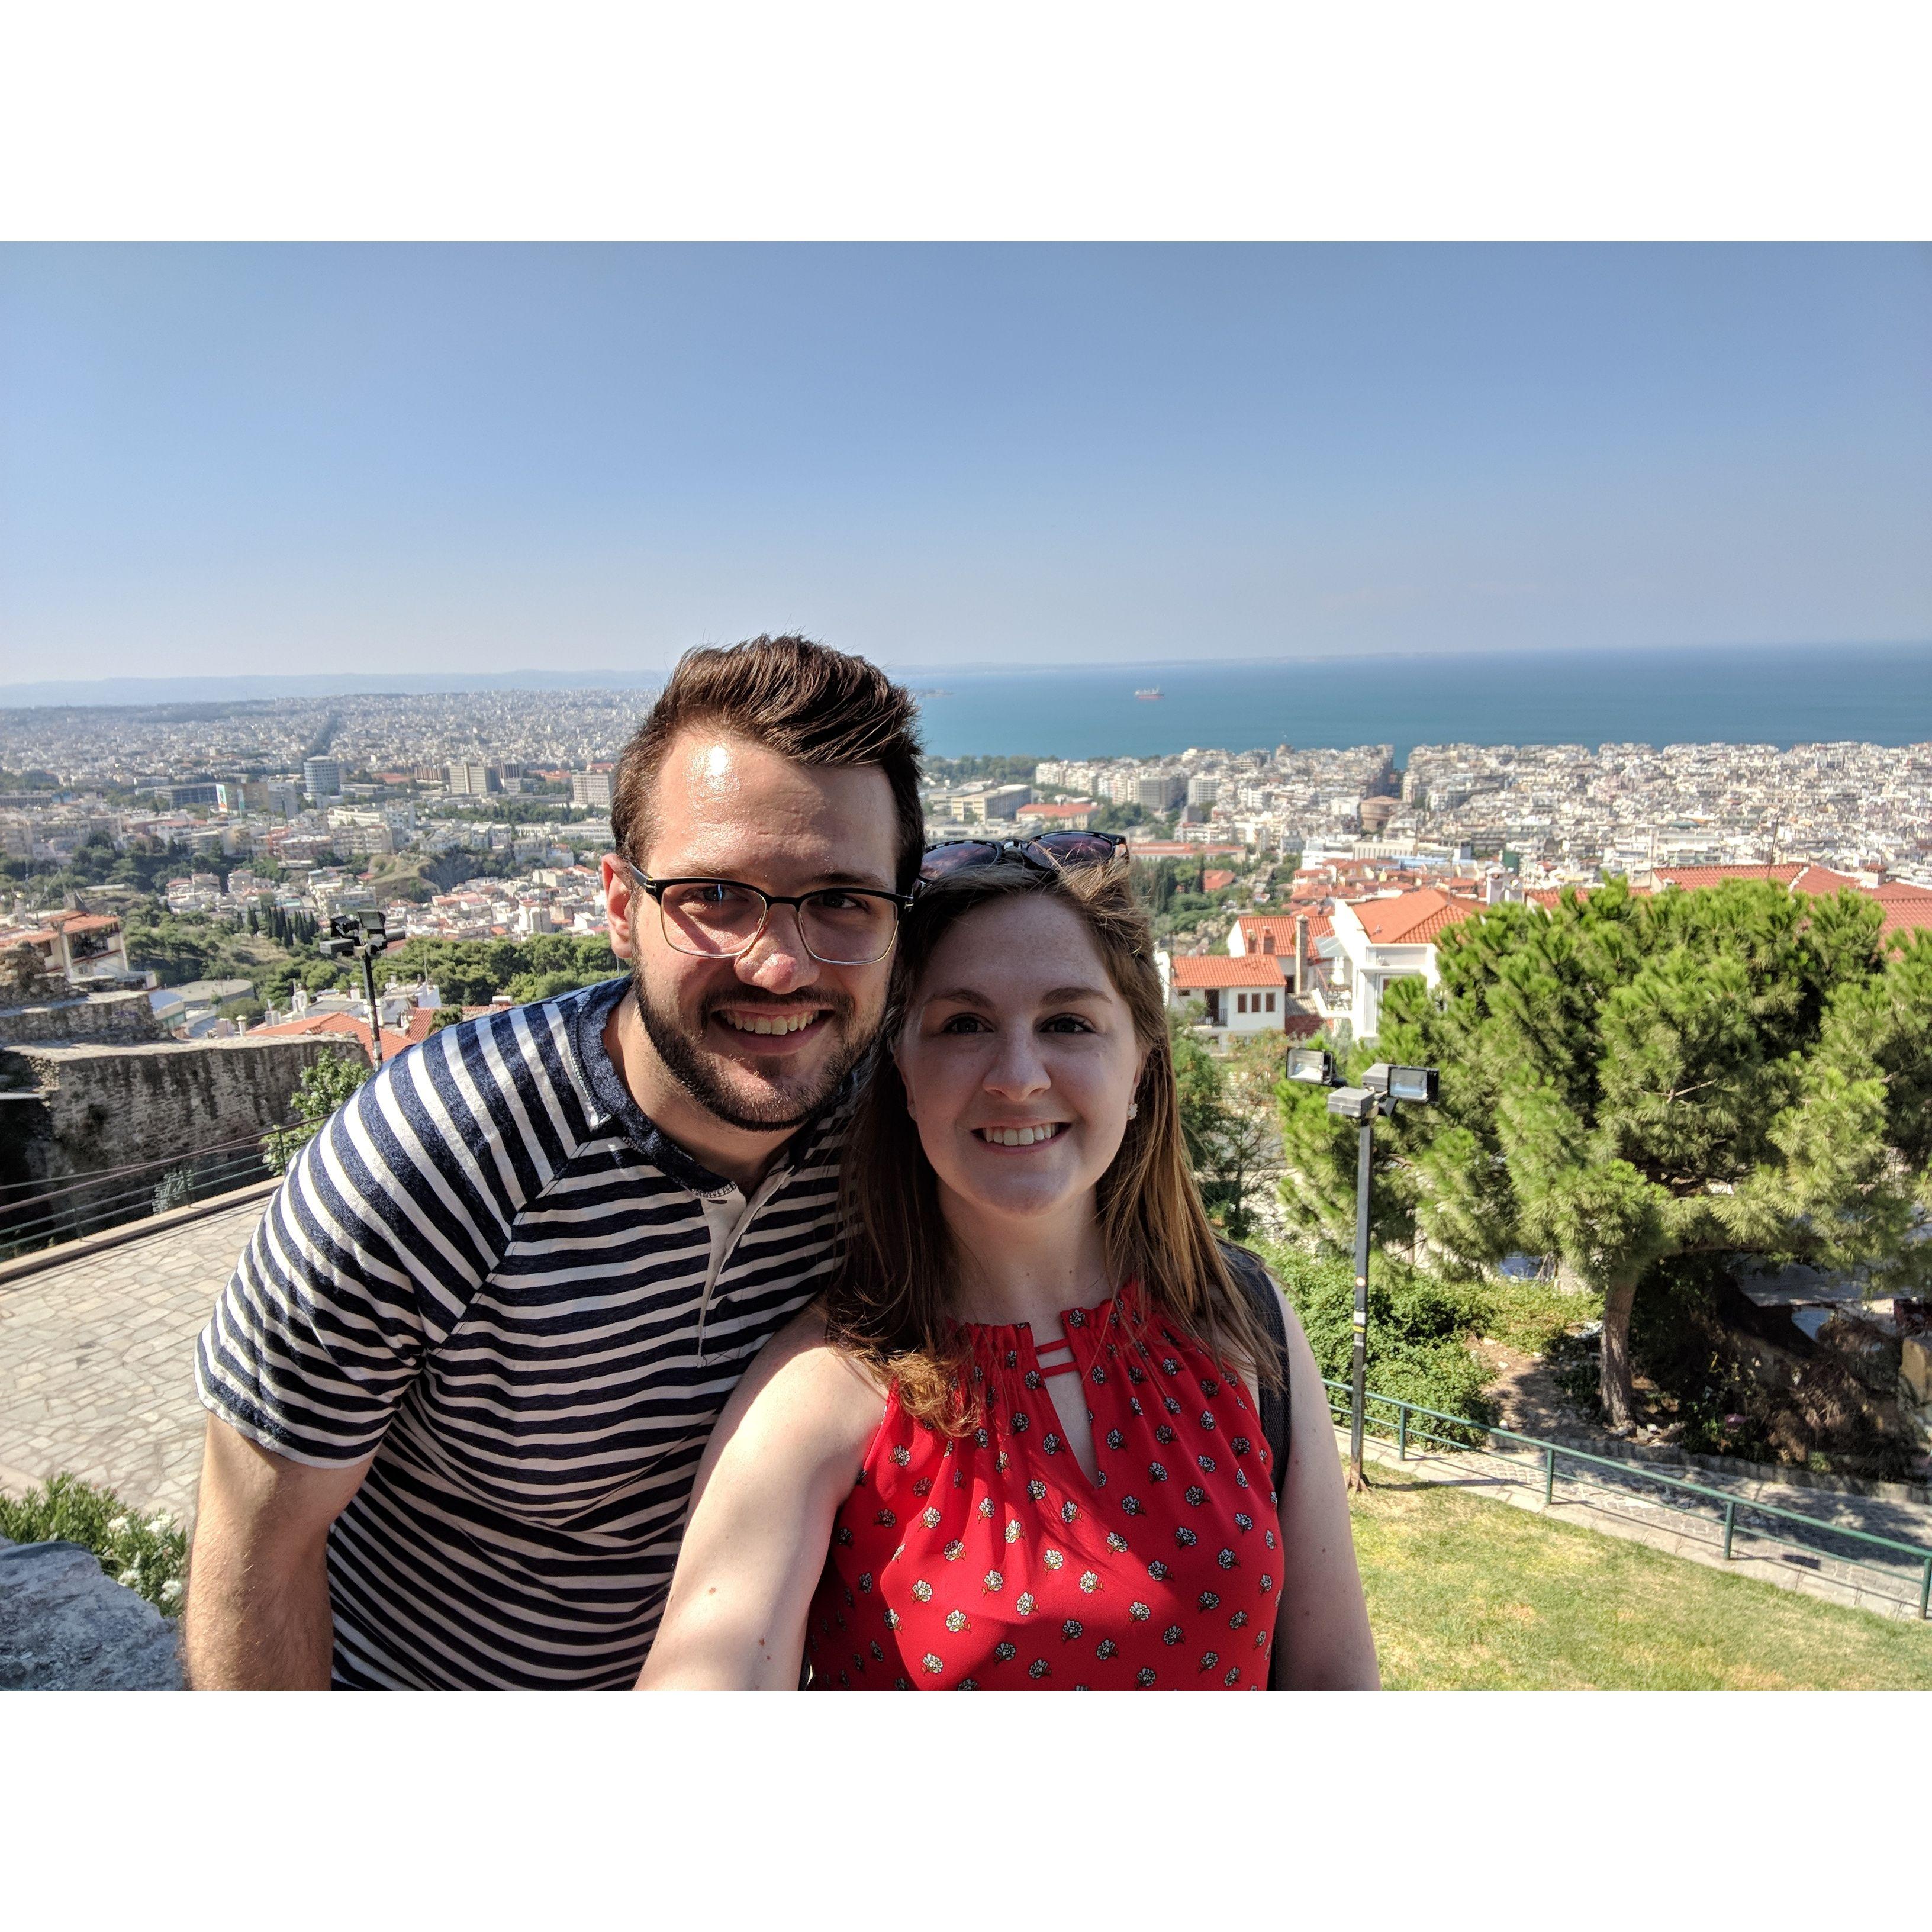 On our trip to Greece, one year into dating.